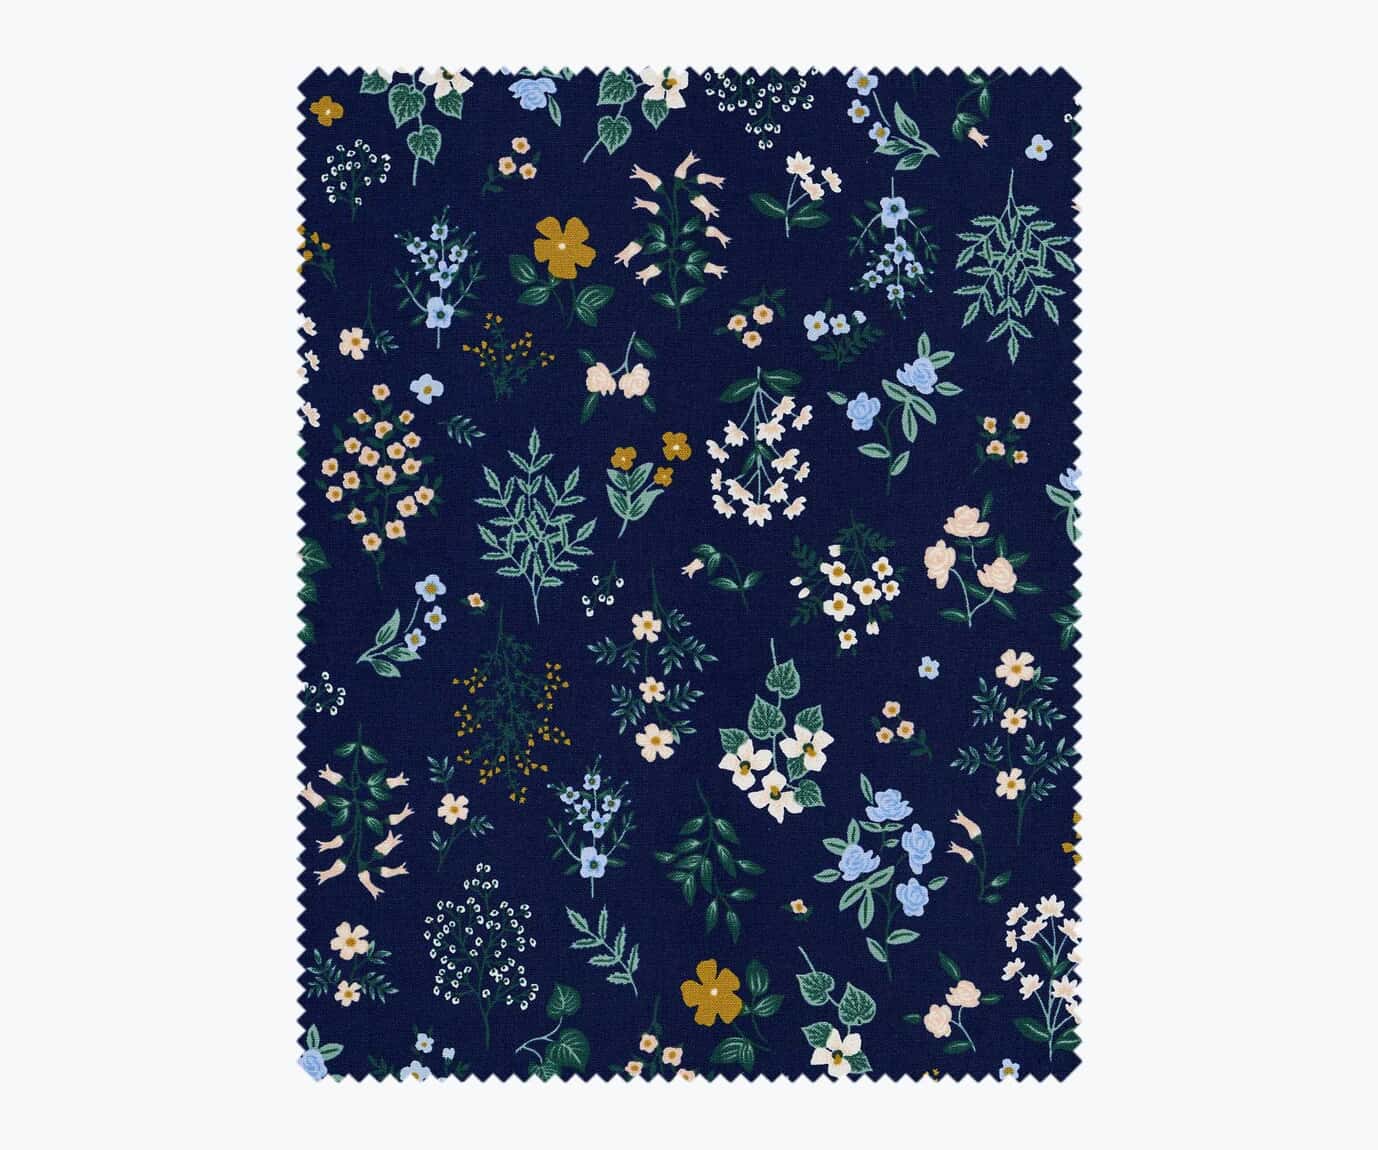 REMNANT 0.44 Metre - Rifle Paper Co - Hawthorne Navy Cotton from Strawberry Fields